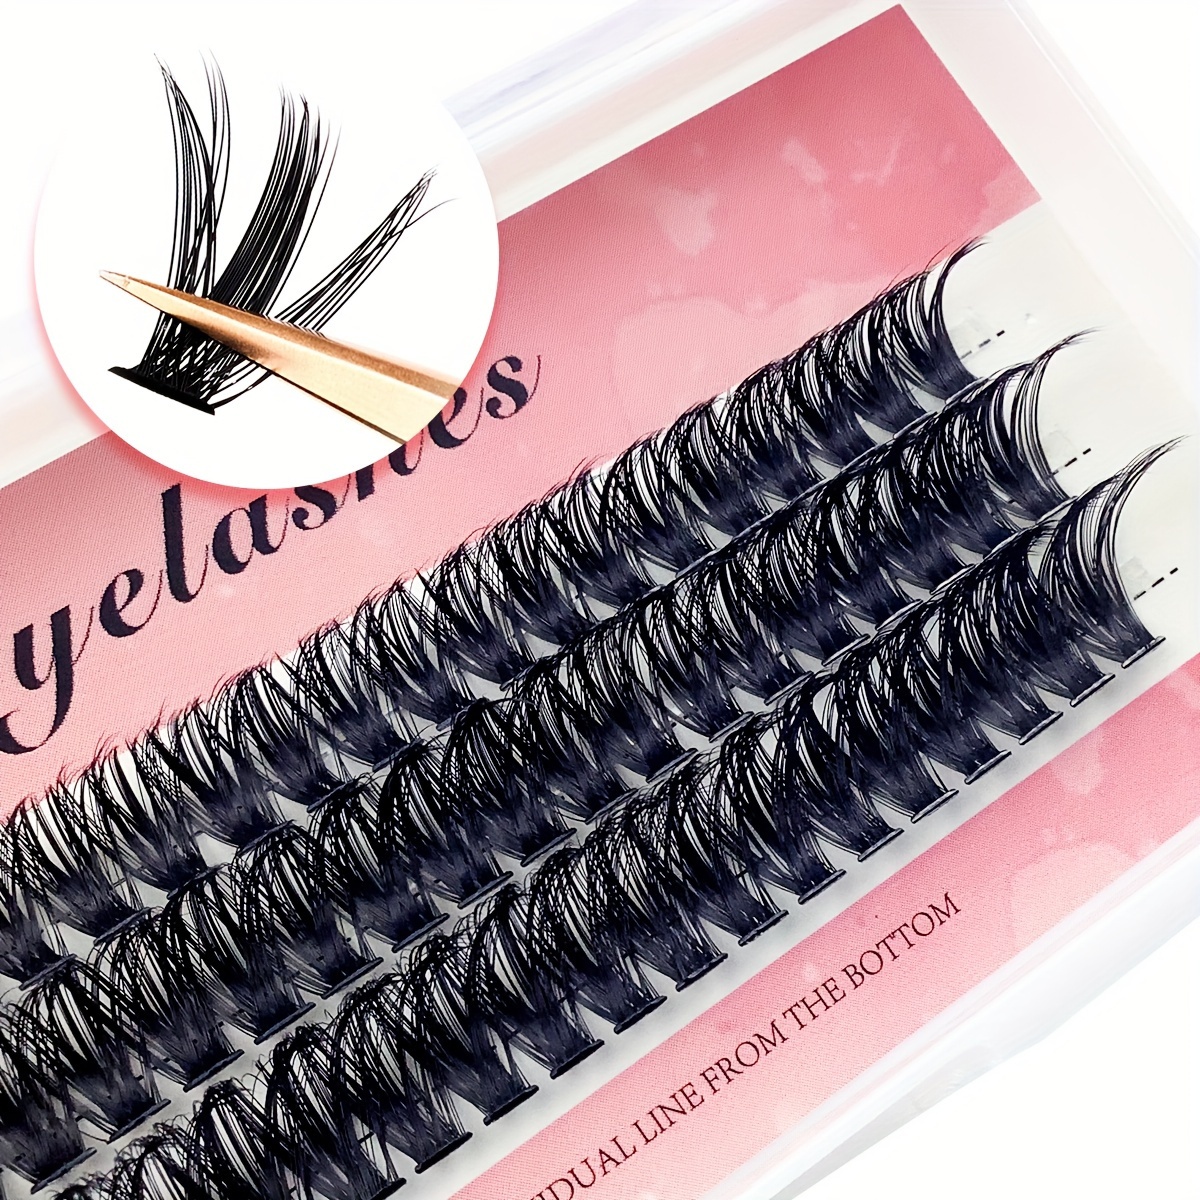 

Mixed Lengths 12-16mm Faux Mink Eyelashes, Lightweight Self-grafting Extensions, 3d Effect, Super Thin Band, Eye-enlarging Natural Look